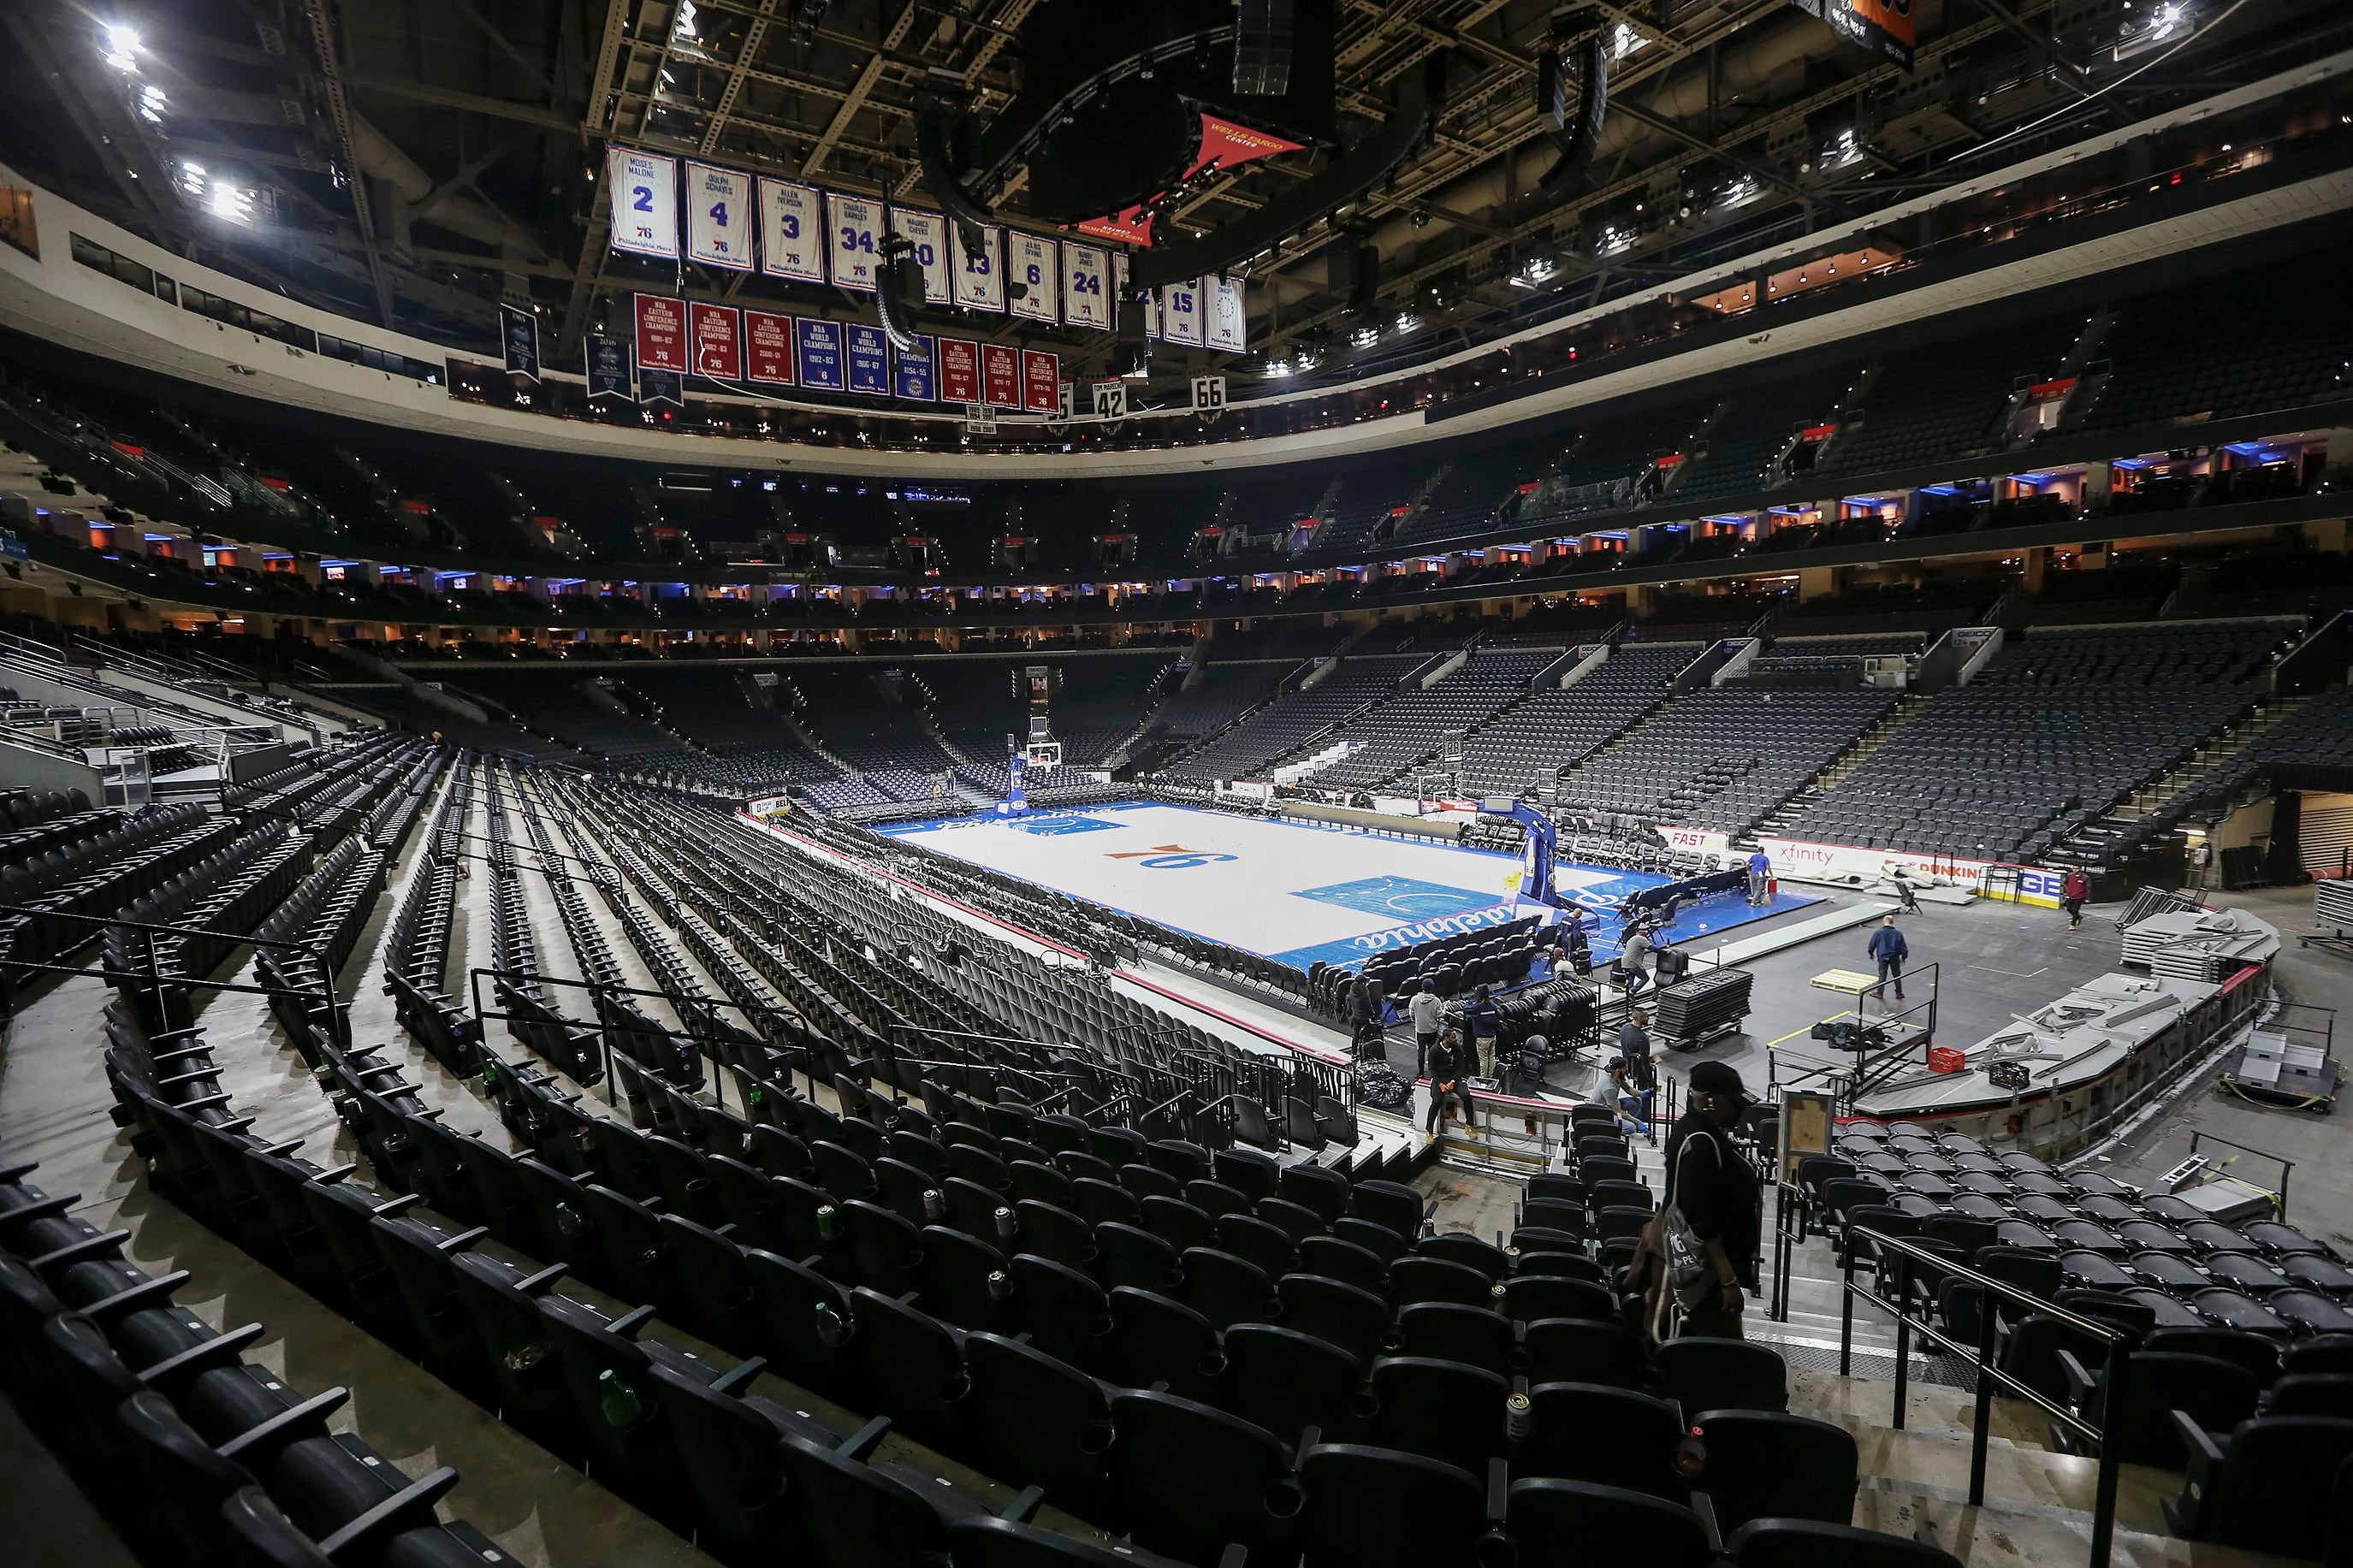 Explainer: What's the status of the proposed 76ers arena in Center